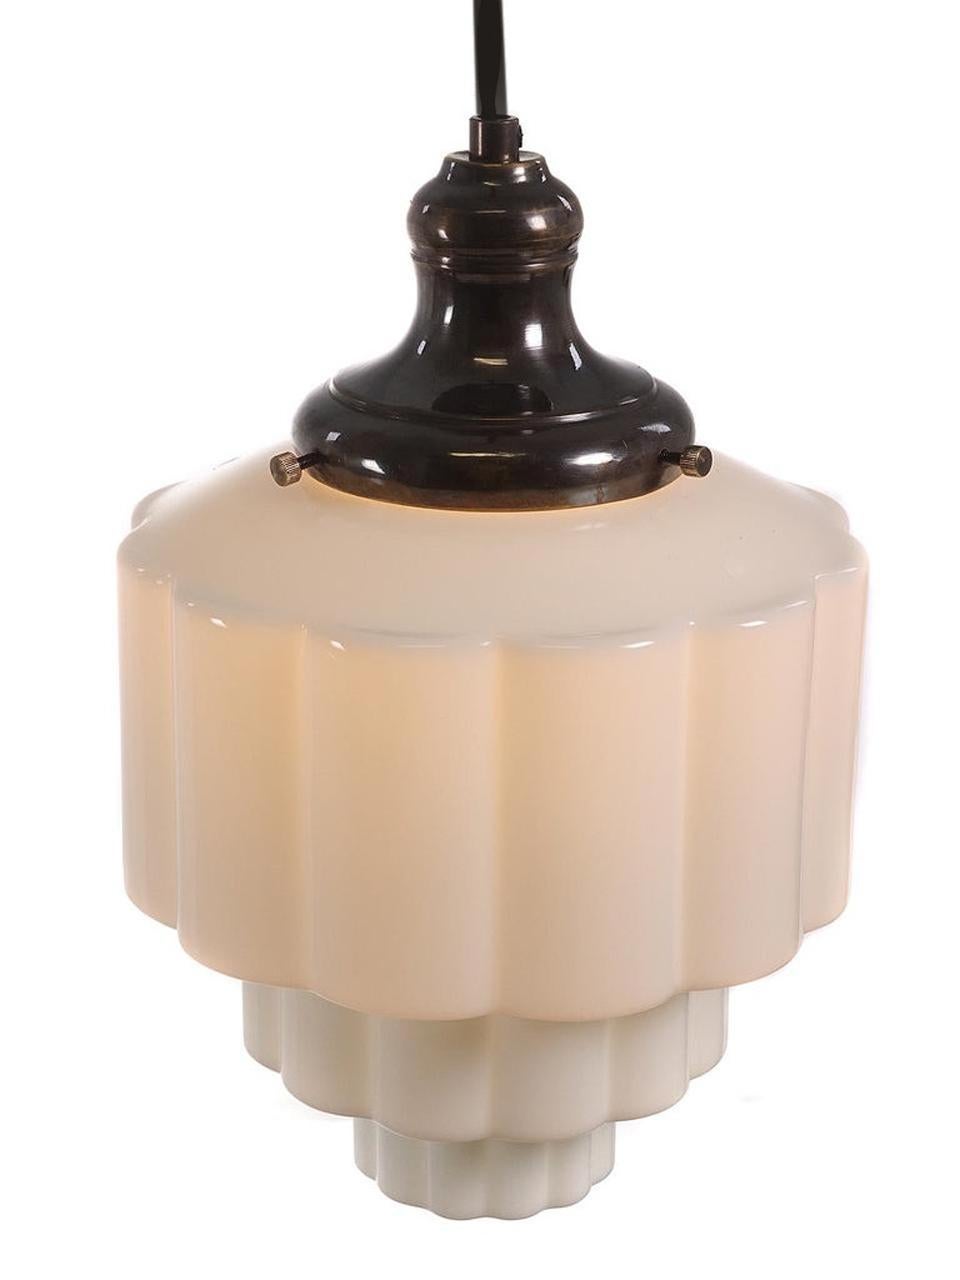 Sometimes these are called wedding cake or skyscraper shades. The style is totally Art Deco. What I like about these shades are the very useable size. The diameter is only 8 inches. It is white milk glass and the shade takes on the hue of the bulb